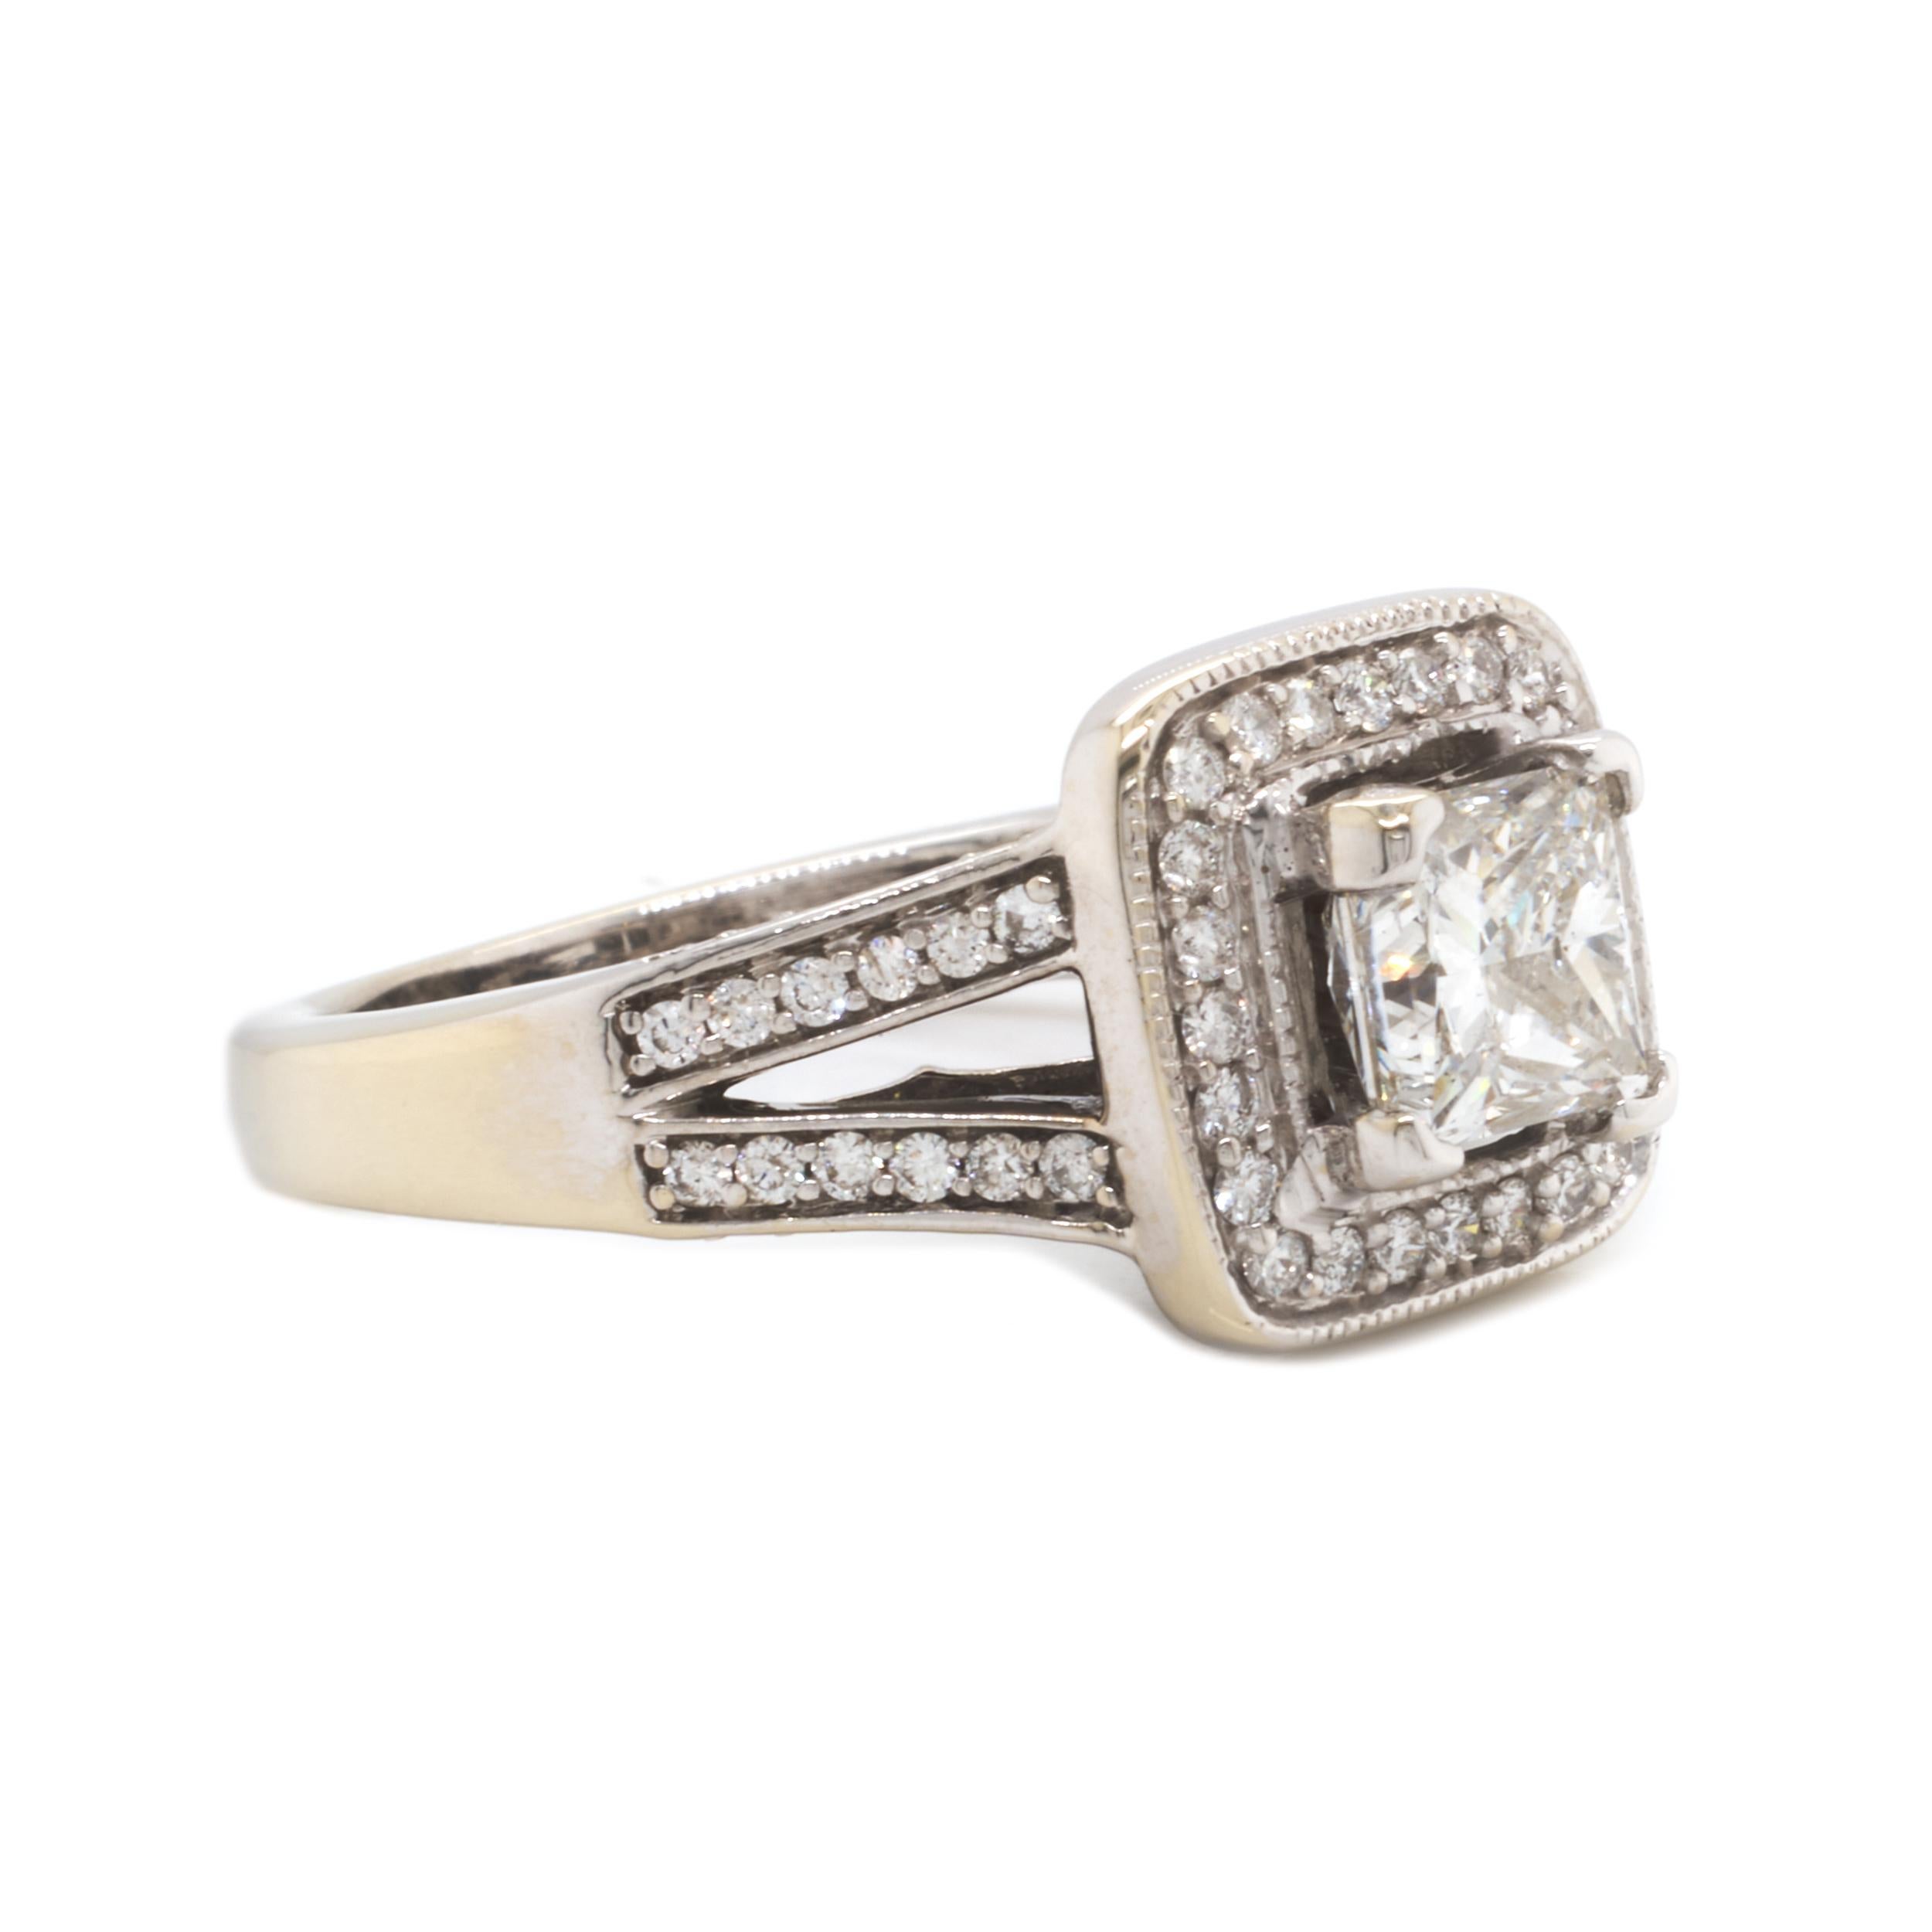 Designer: custom
Material: 14K white gold
Diamond: 1 princess cut = 1.24ct 
Color: I
Clarity: I1
Diamond: 108 round brilliant cut = 1.20cttw
Color: G
Clarity: SI1
Ring Size: 5.75 (please allow up to 2 additional business days for sizing